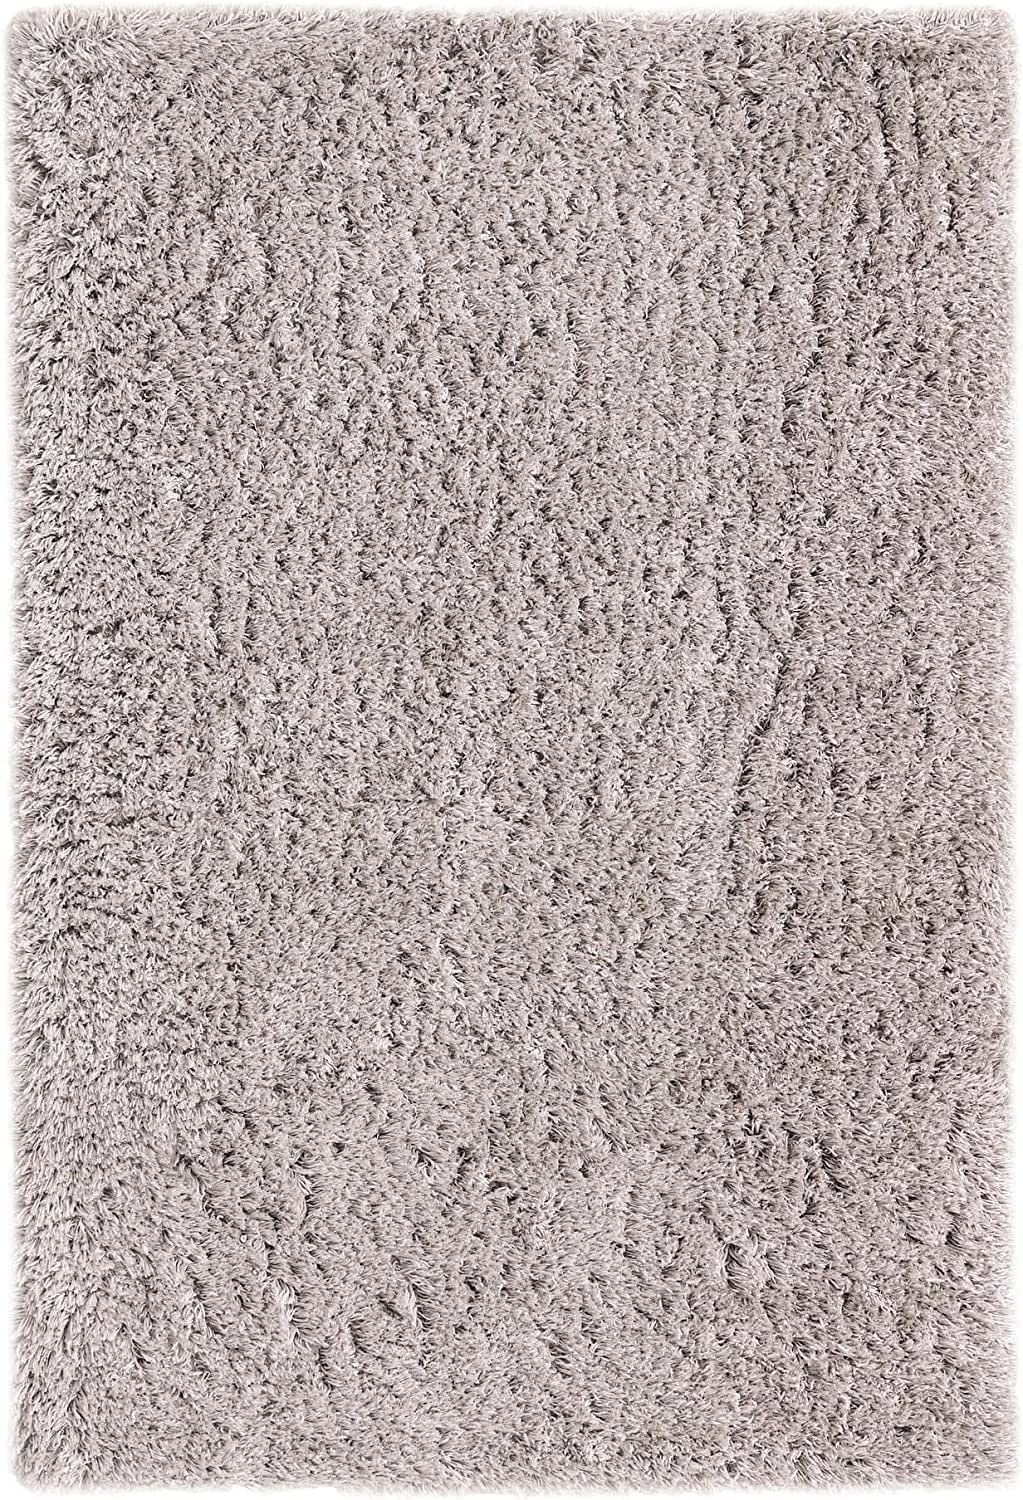 Rugs Infinity Collection Solid Shag Area Rug | Ubuy India In Ash Infinity Shag Rugs (View 5 of 15)